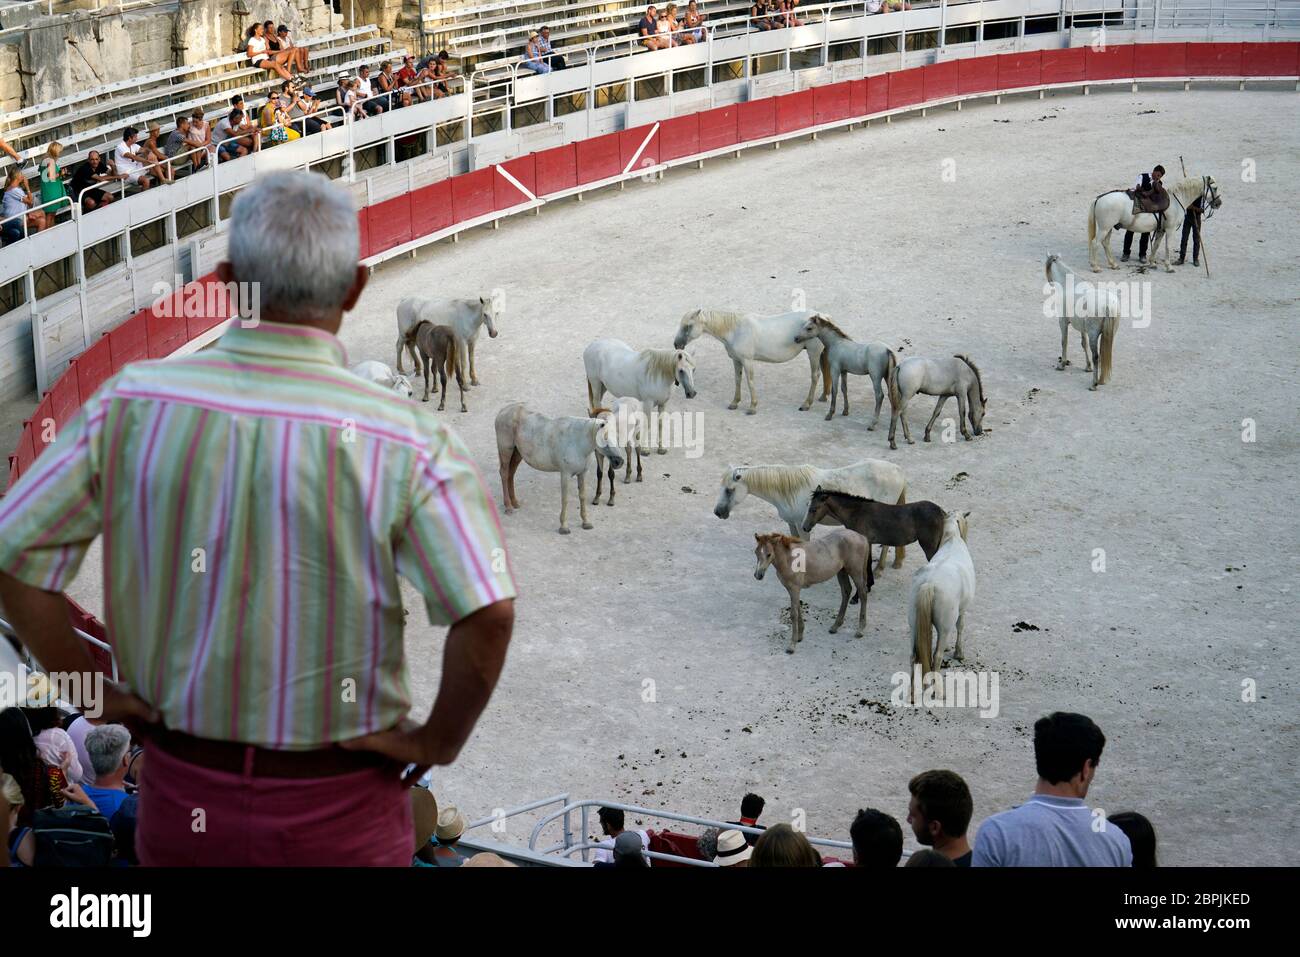 Audiences watching the Camargue cowboys aka Gardians showing their skill of horse riding and cattle herding in ancient Roman Amphitheater. Arles.Bouches-du-Rhone.Alpes-Cote d'Azur.France Stock Photo